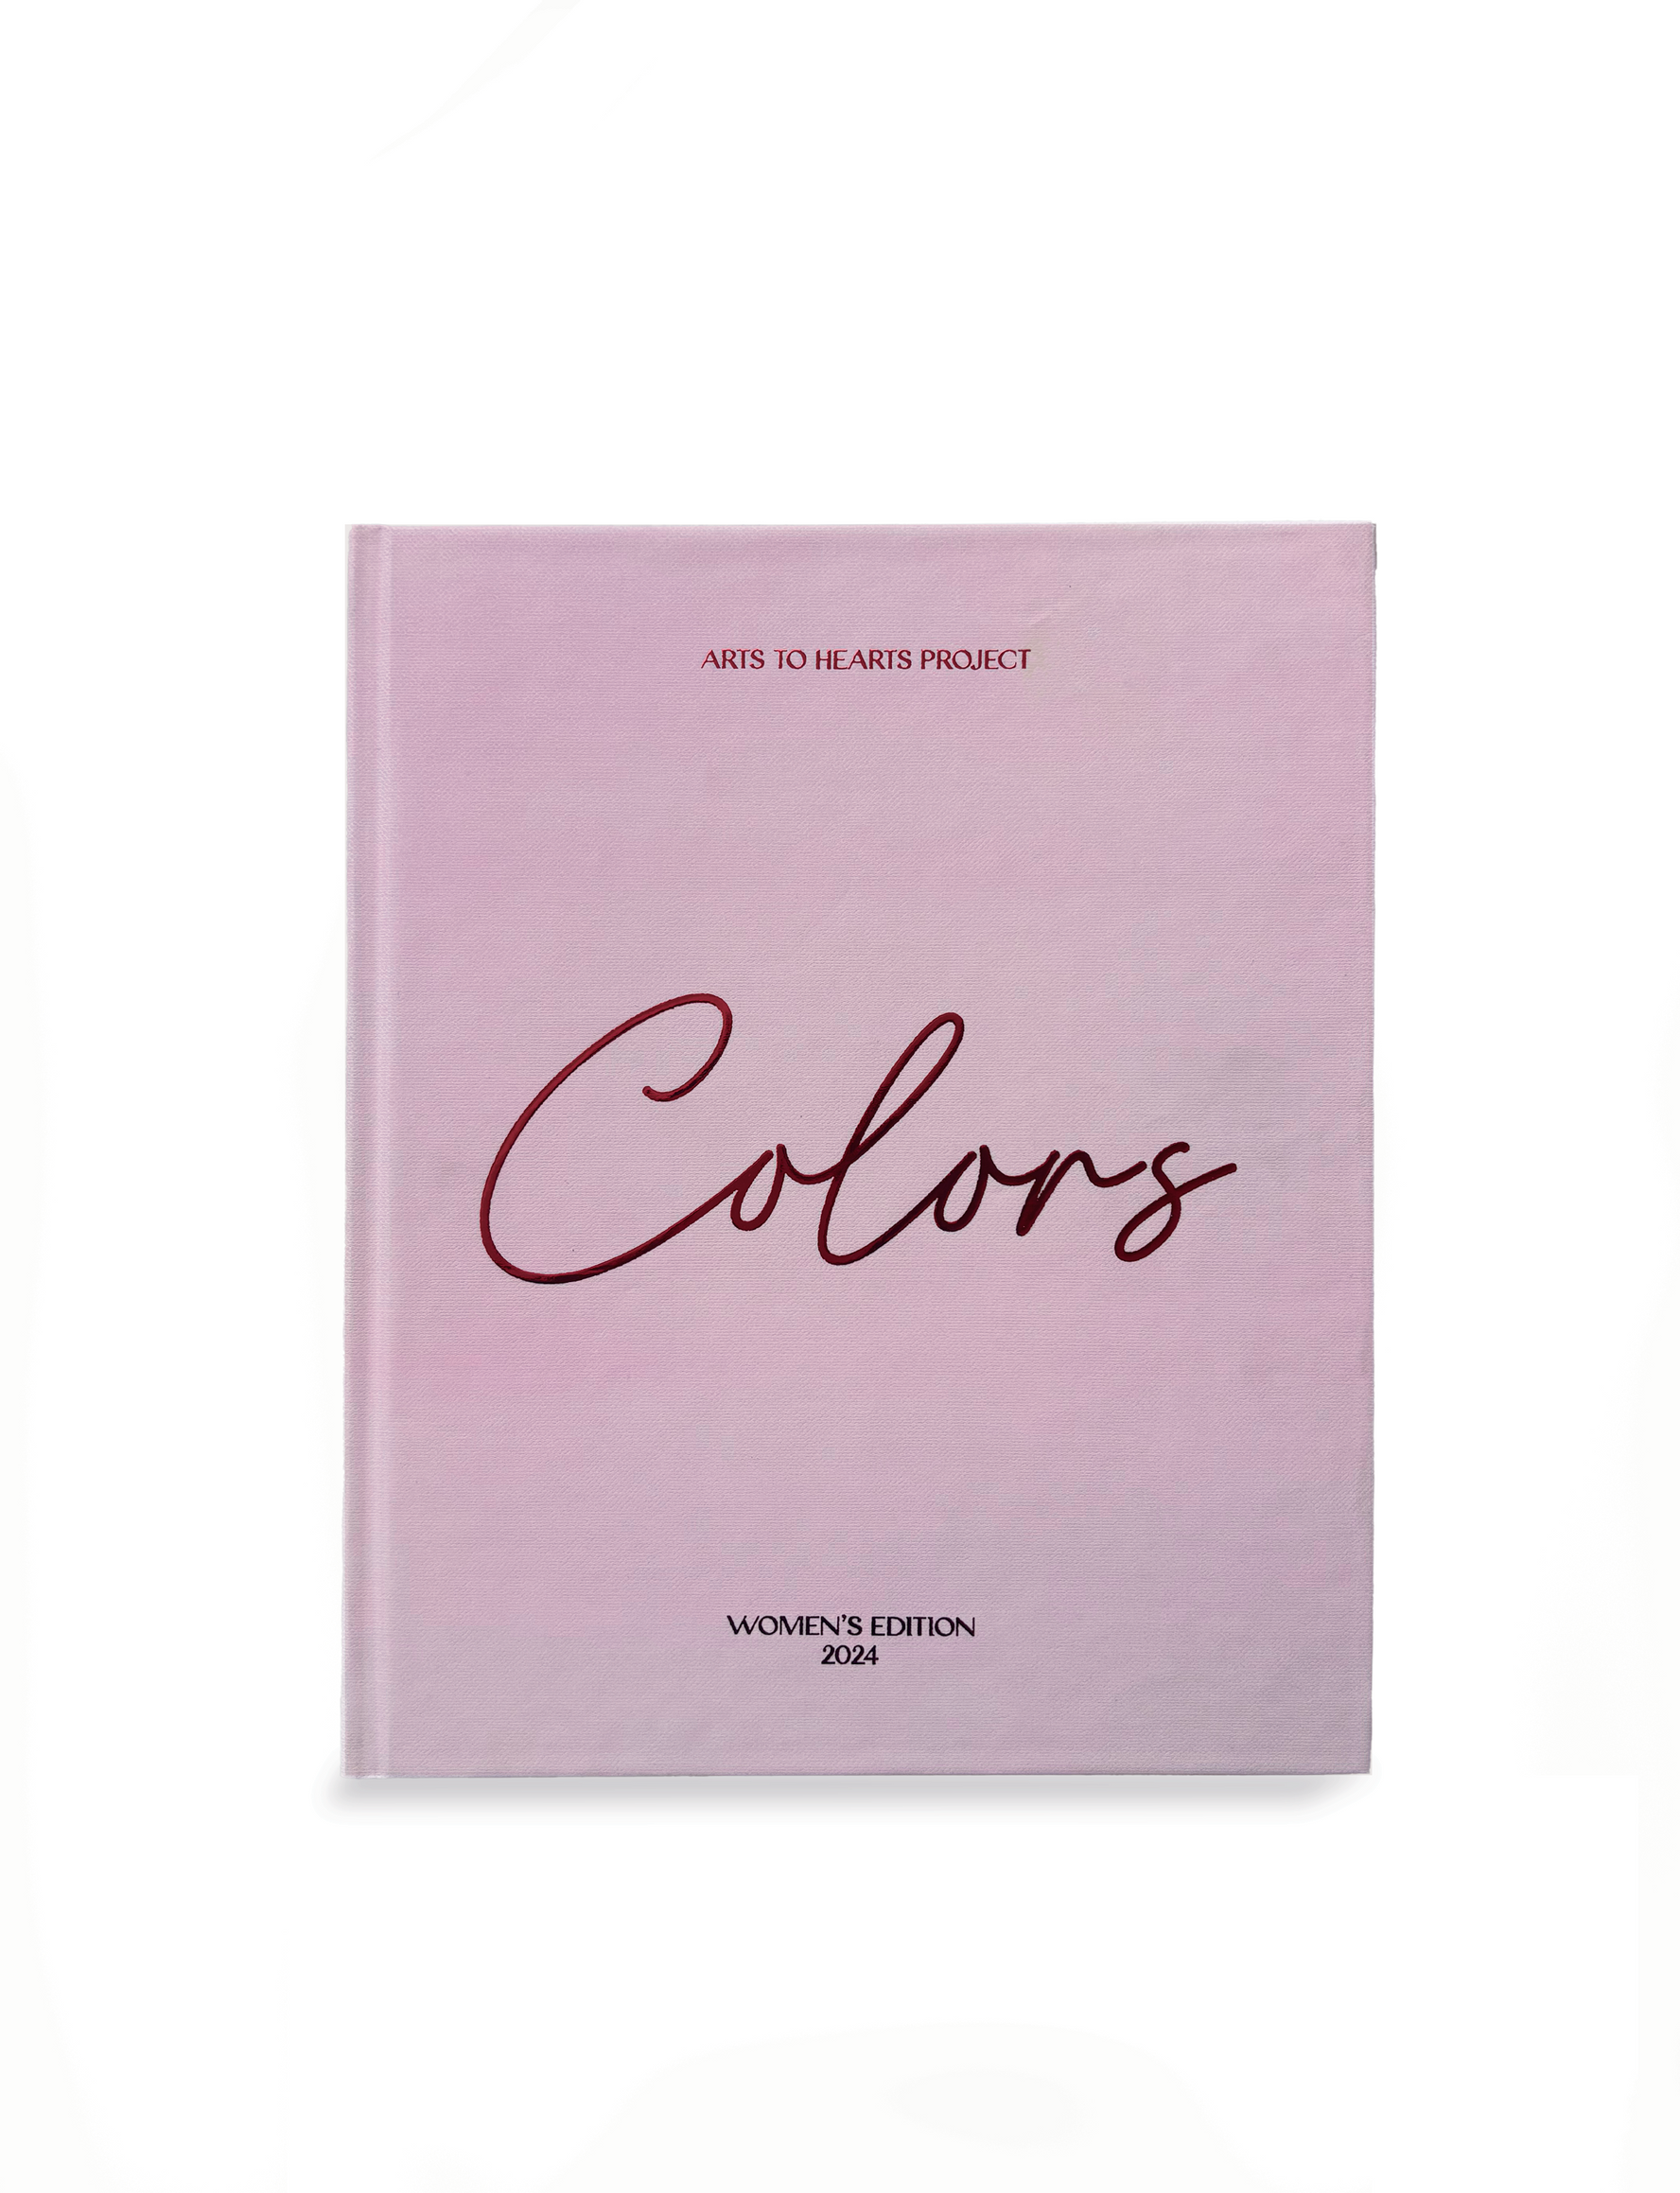 Colors - A Selection of Curated Colorful Artworks by Emerging Women Artists